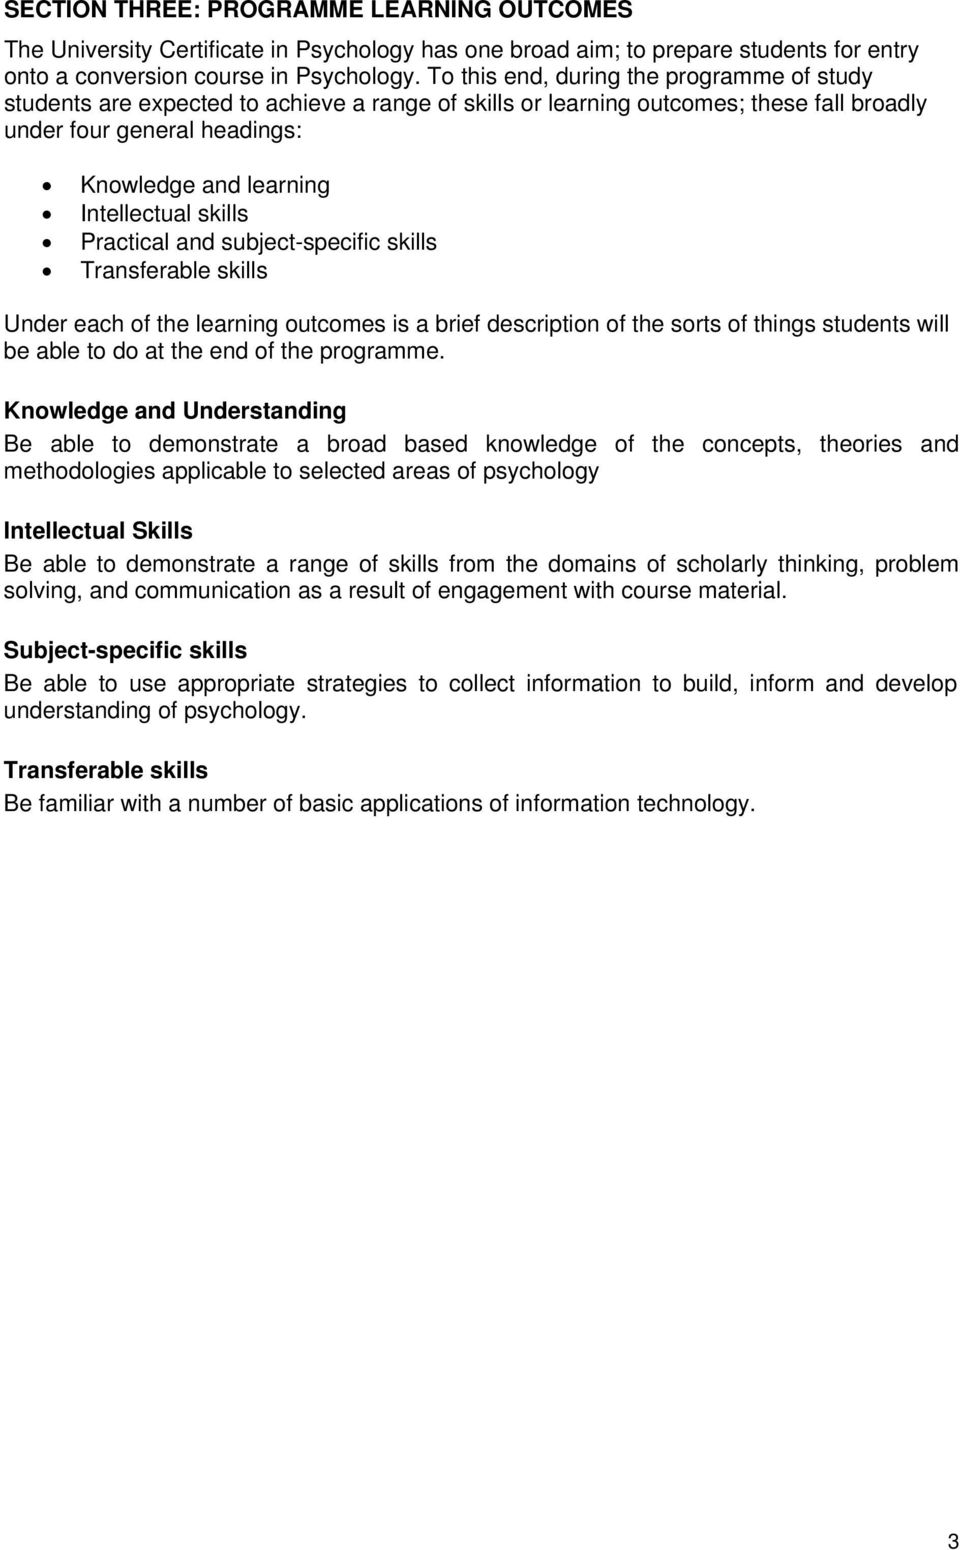 skills Practical and subject-specific skills Transferable skills Under each of the learning outcomes is a brief description of the sorts of things students will be able to do at the end of the